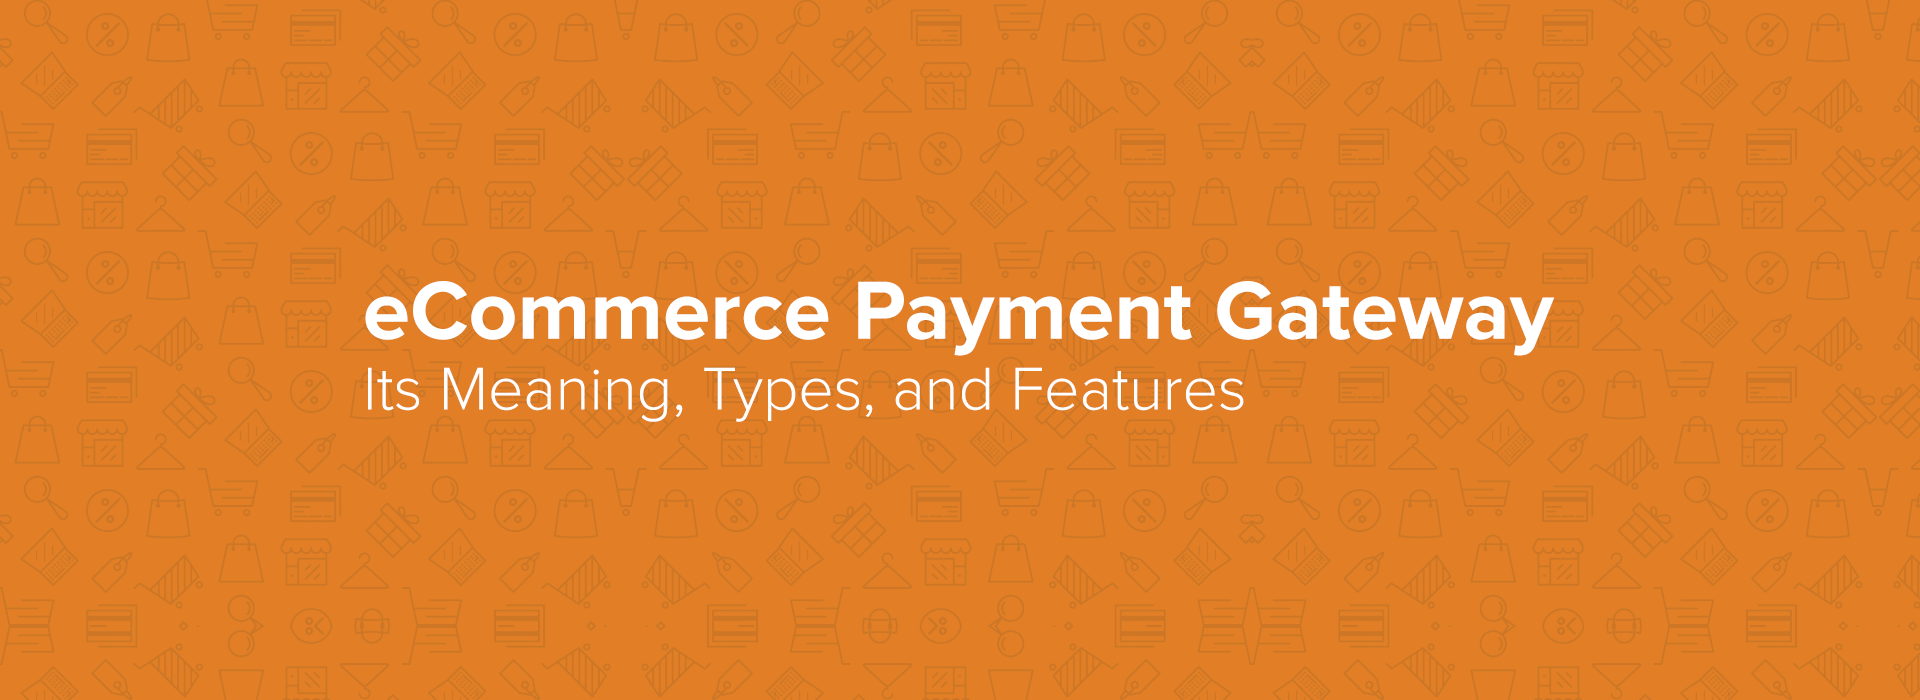 eCommerce-Payment-Gateway-featured-image